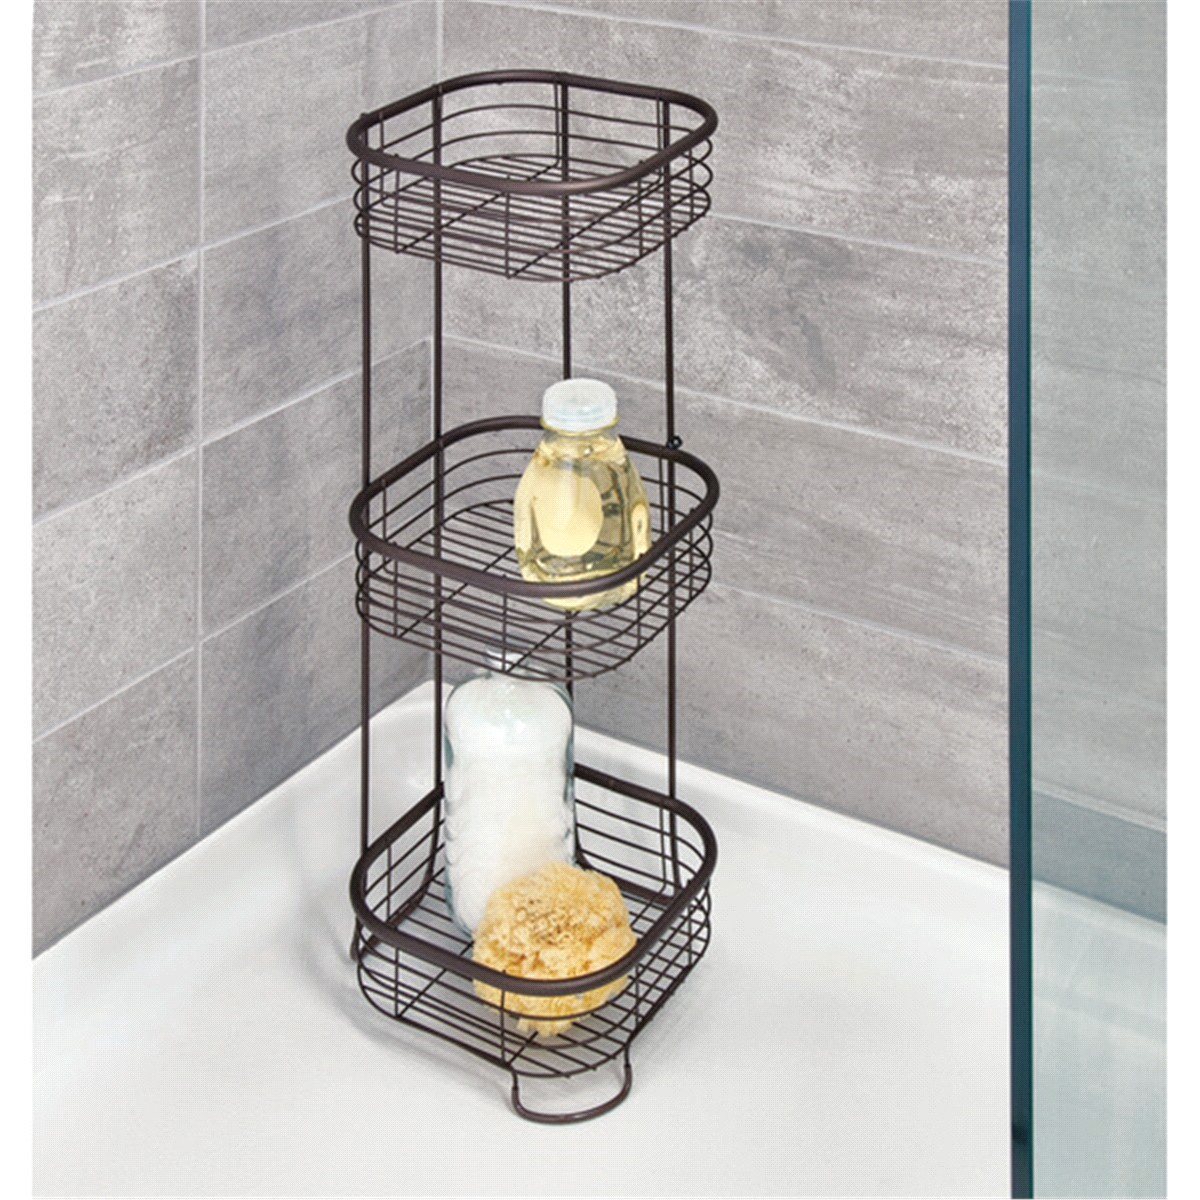 slide 5 of 5, InterDesign Forma Free Standing Bathroom or Shower Storage Shelves for Towels, Soap, Shampoo, Lotion, Accessories, Bronze, 1 ct